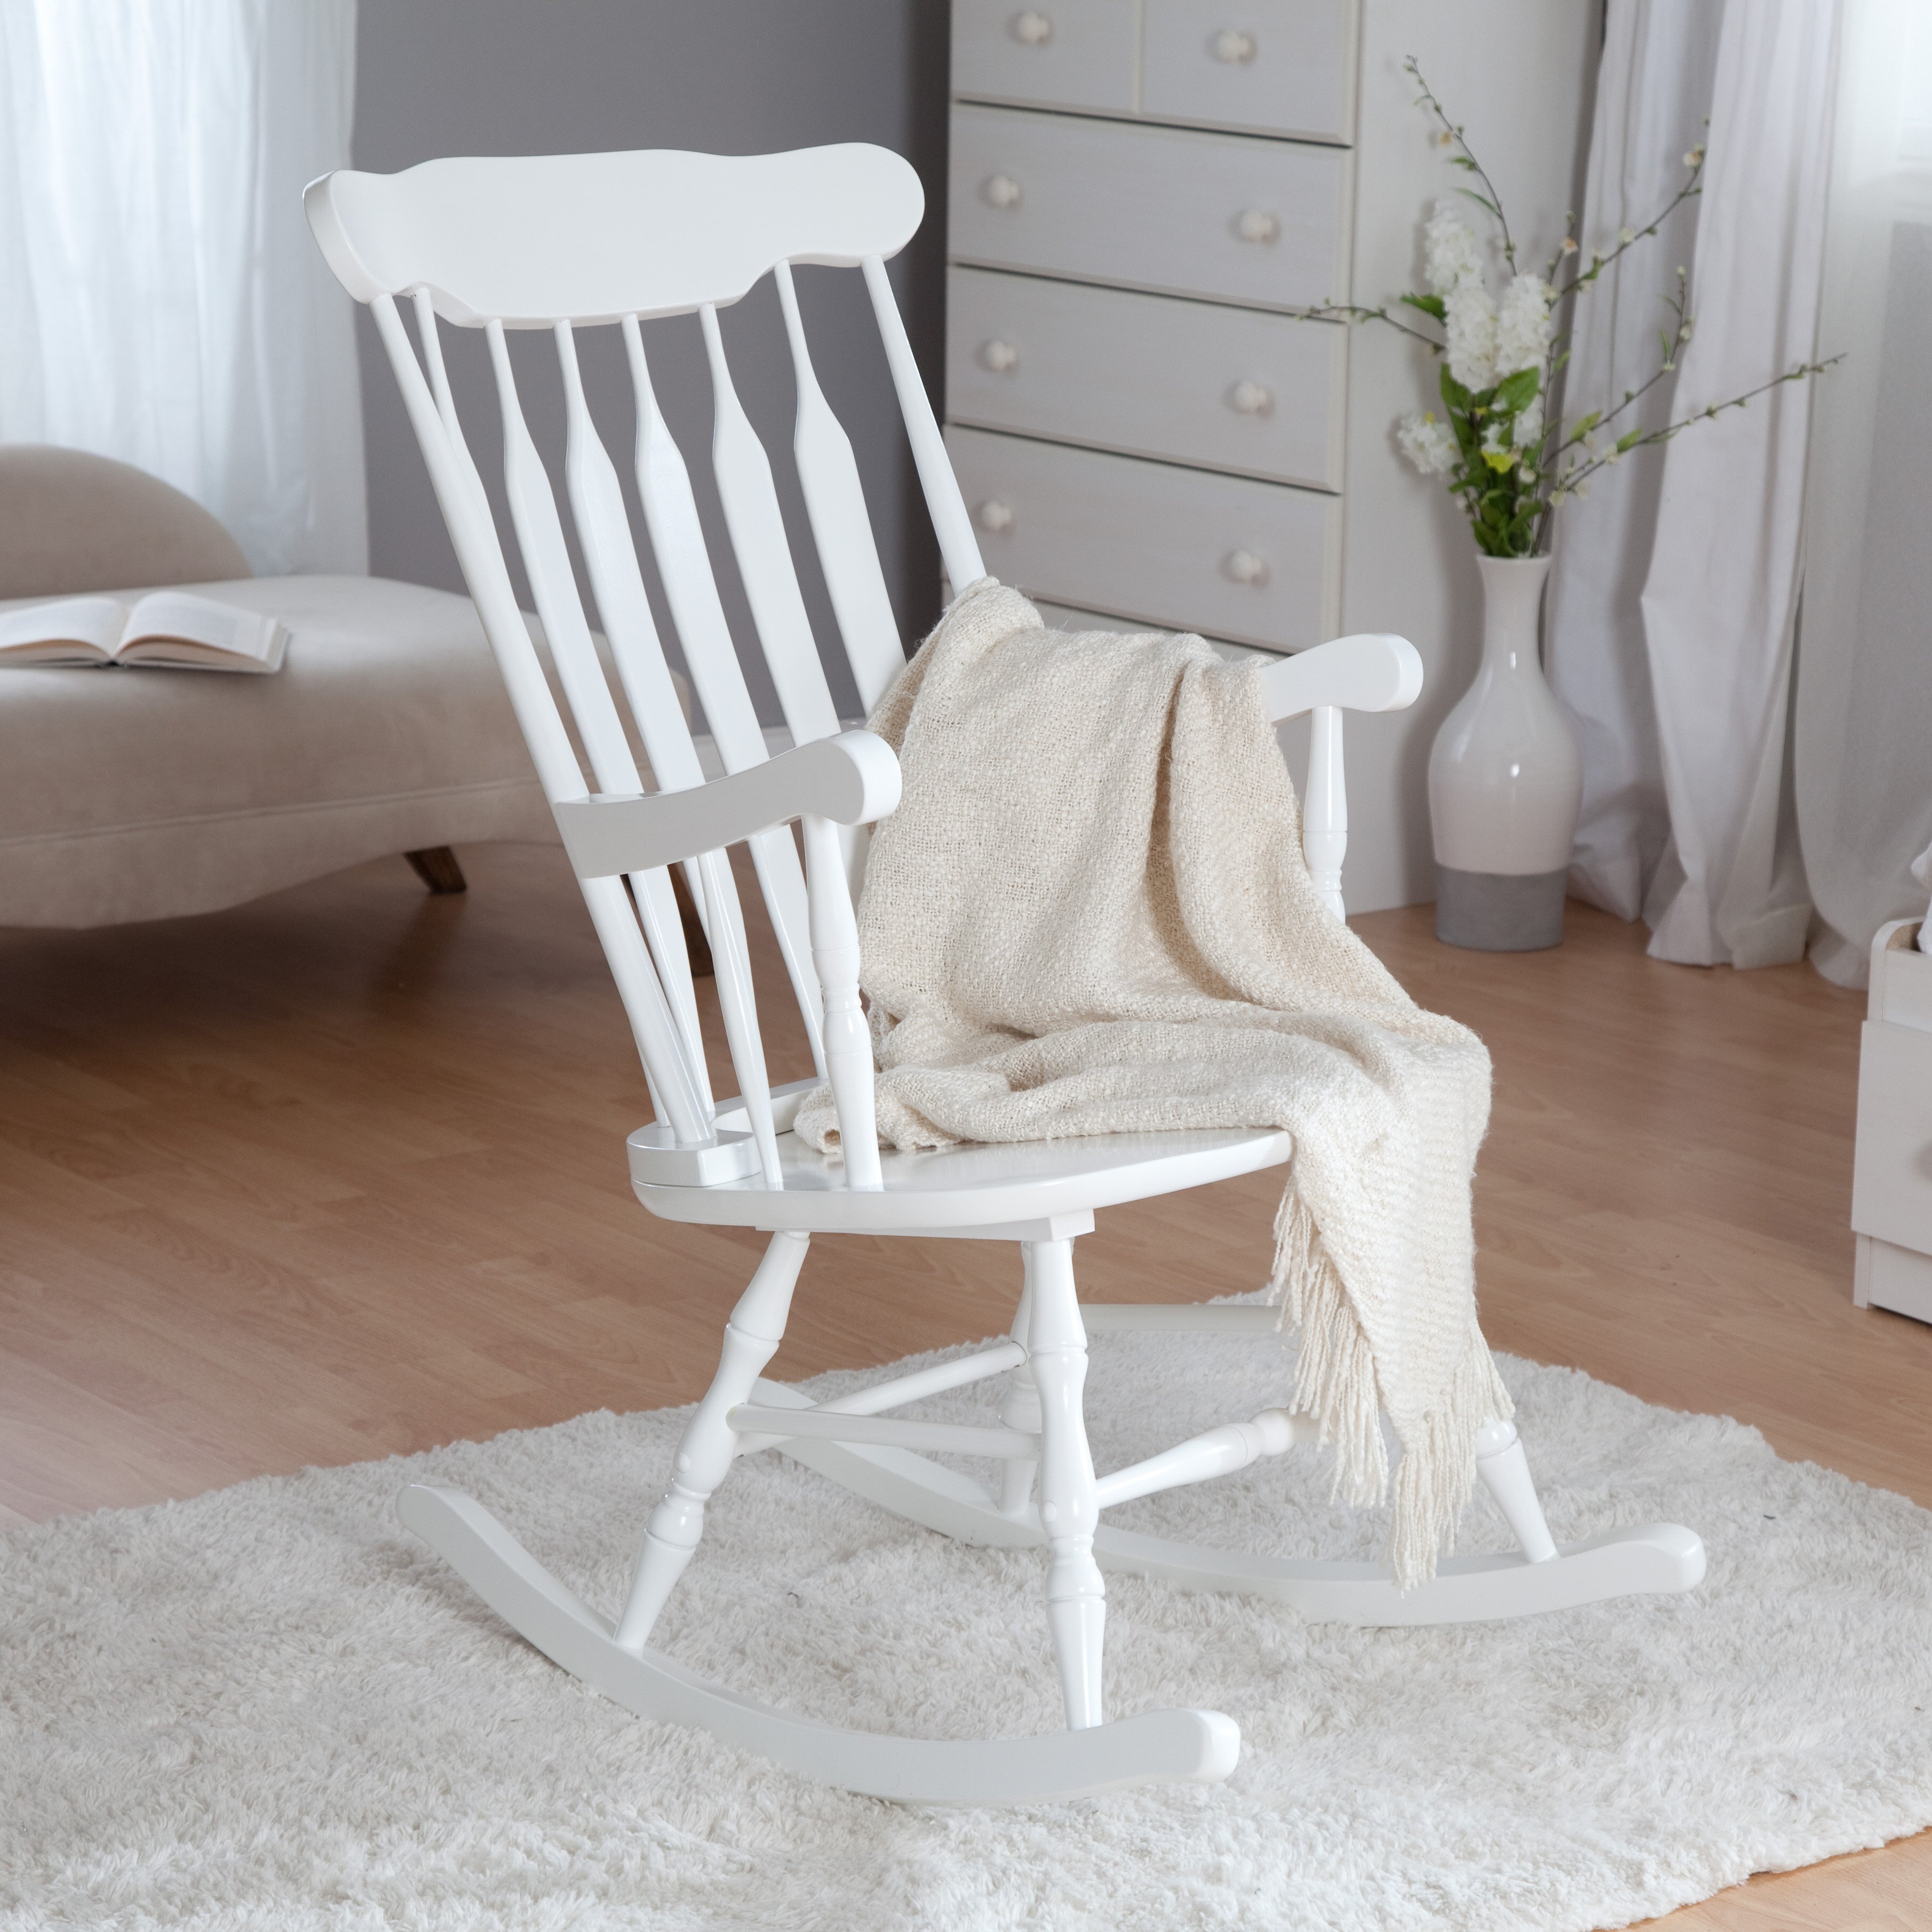 rocking chair for nursery master:kd